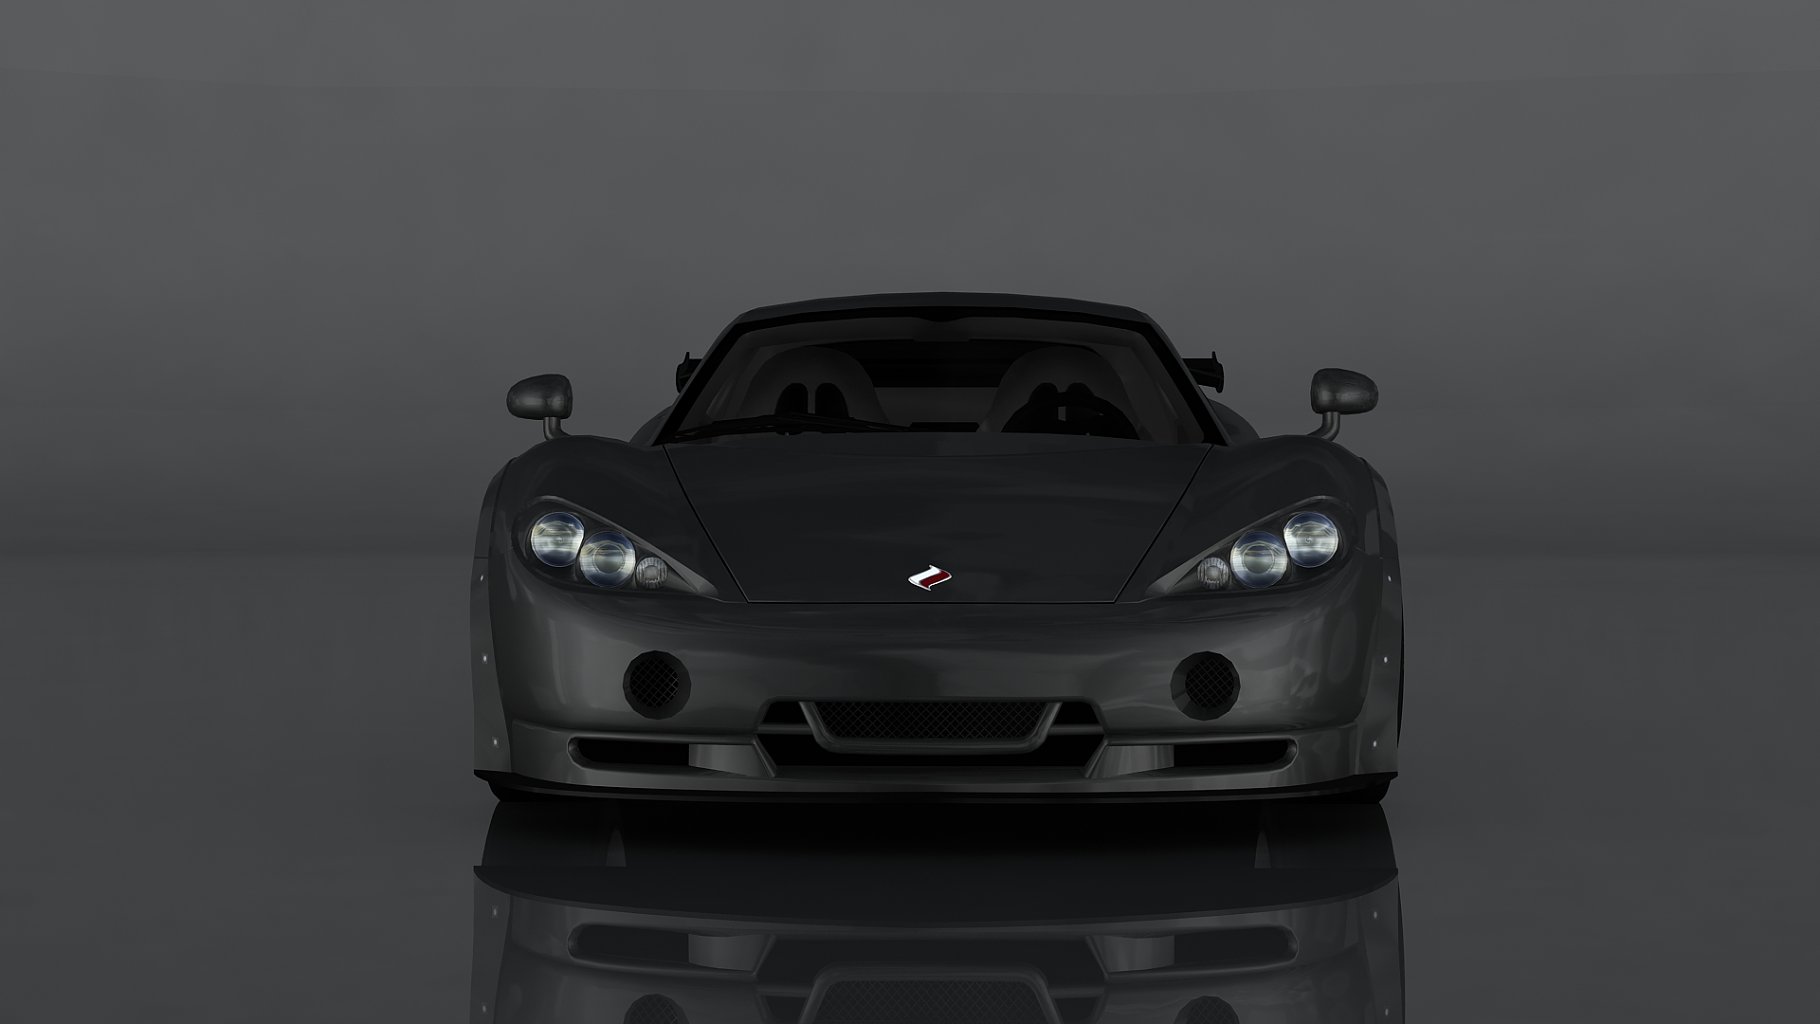 Ascari kz1r low poly 3d model front mockup on a dark gray background.